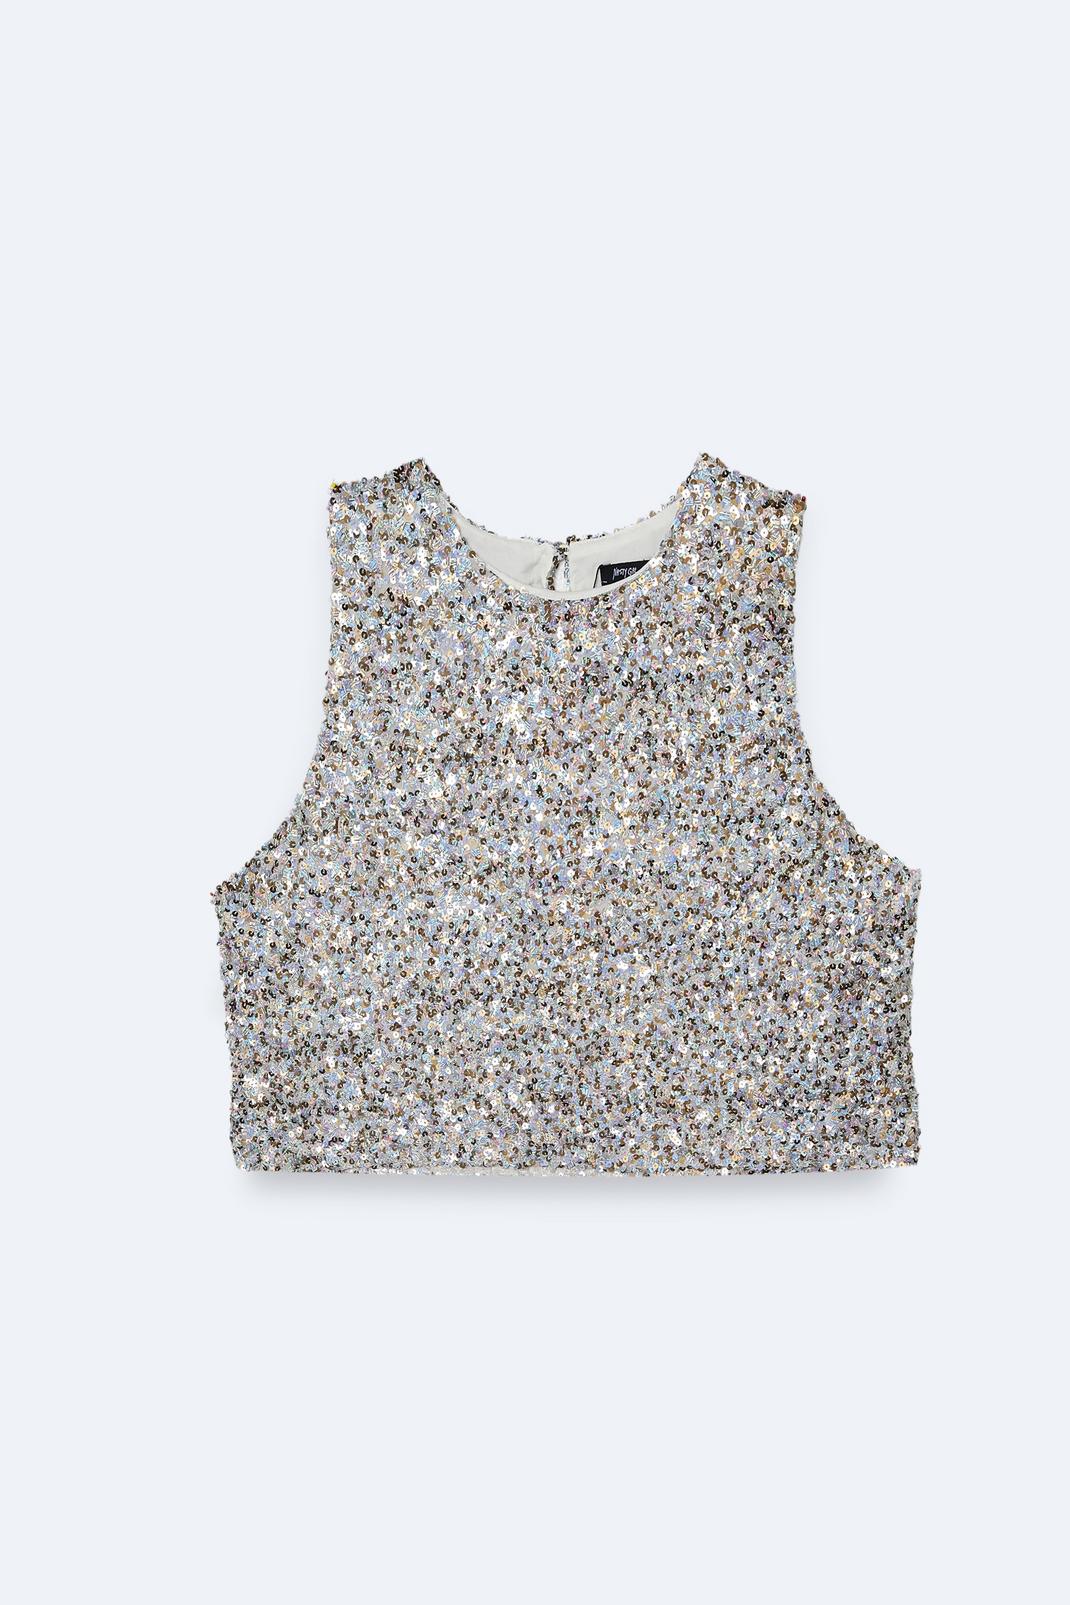 Silver Plus Size Metallic Textured Mixed Sequin Sleeveless Top image number 1